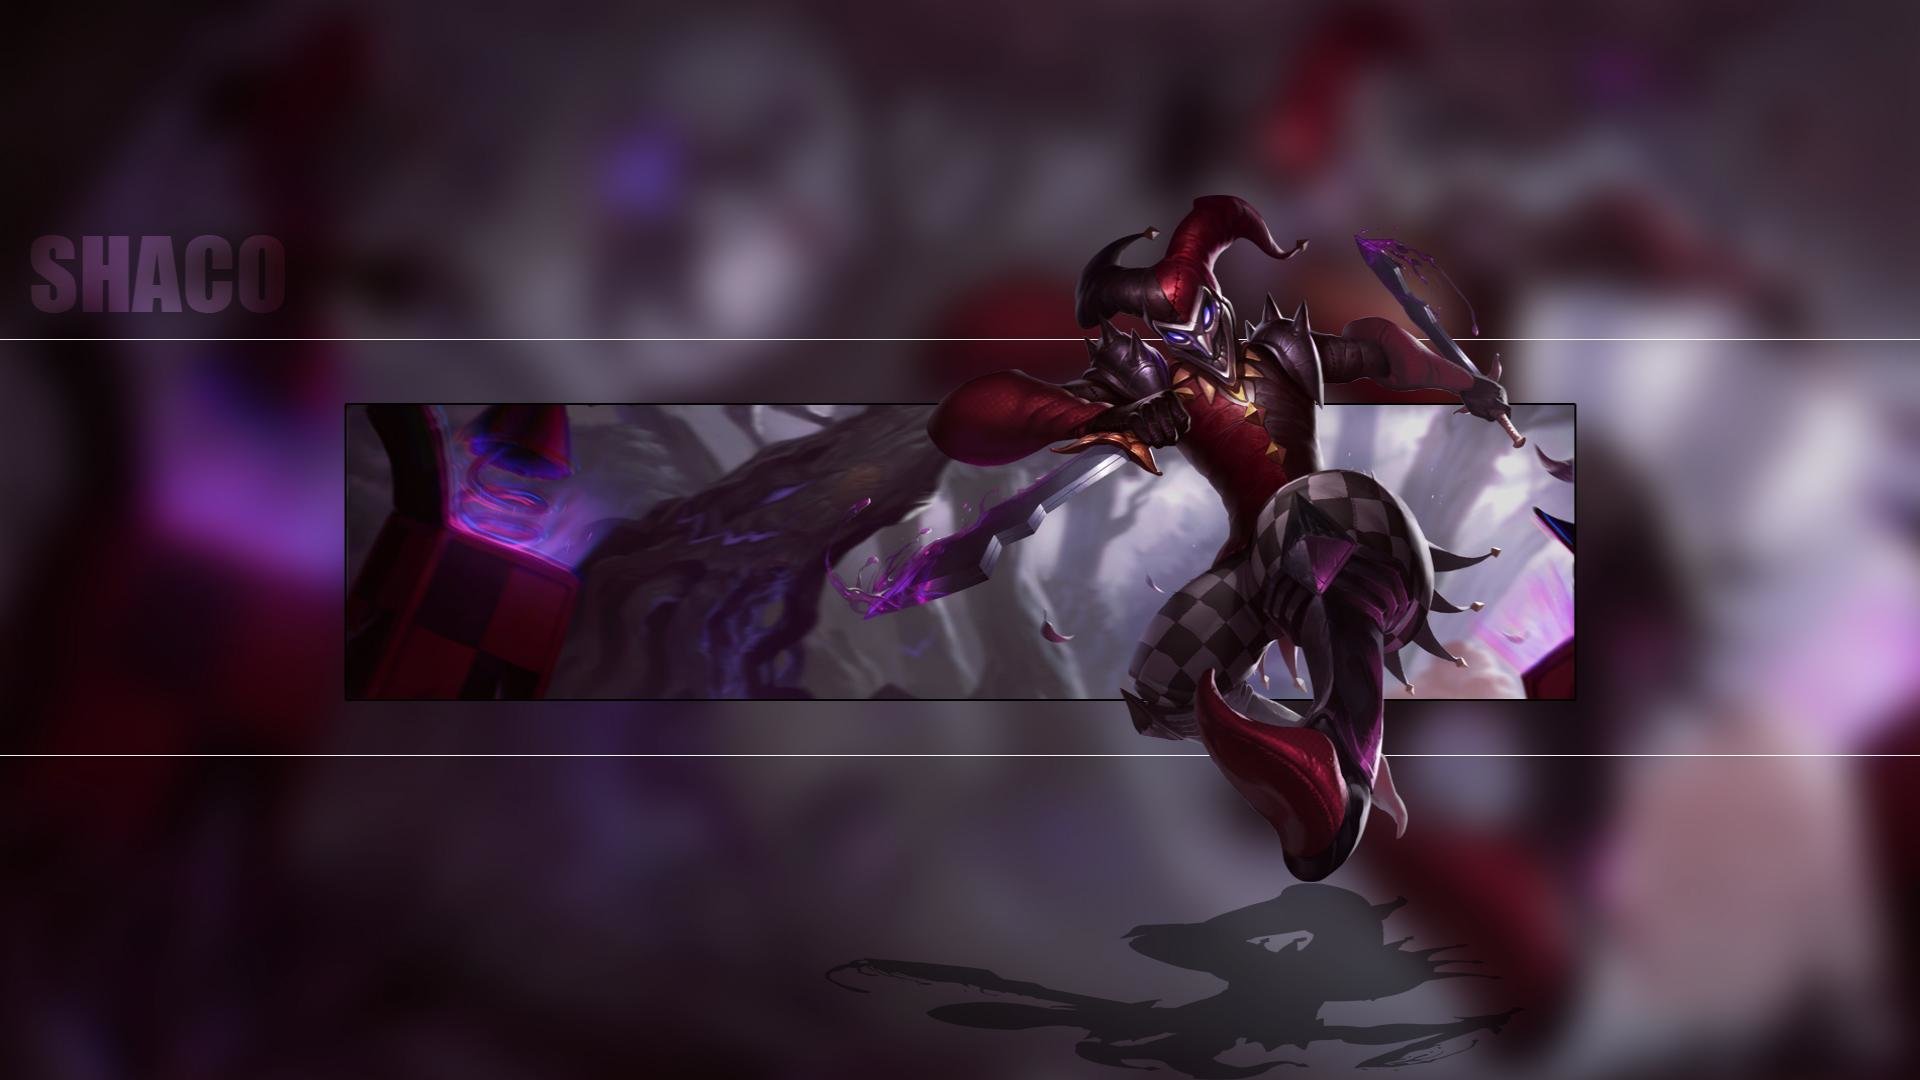 Download Hd 1080p Shaco League Of Legends Desktop Background Id For Free